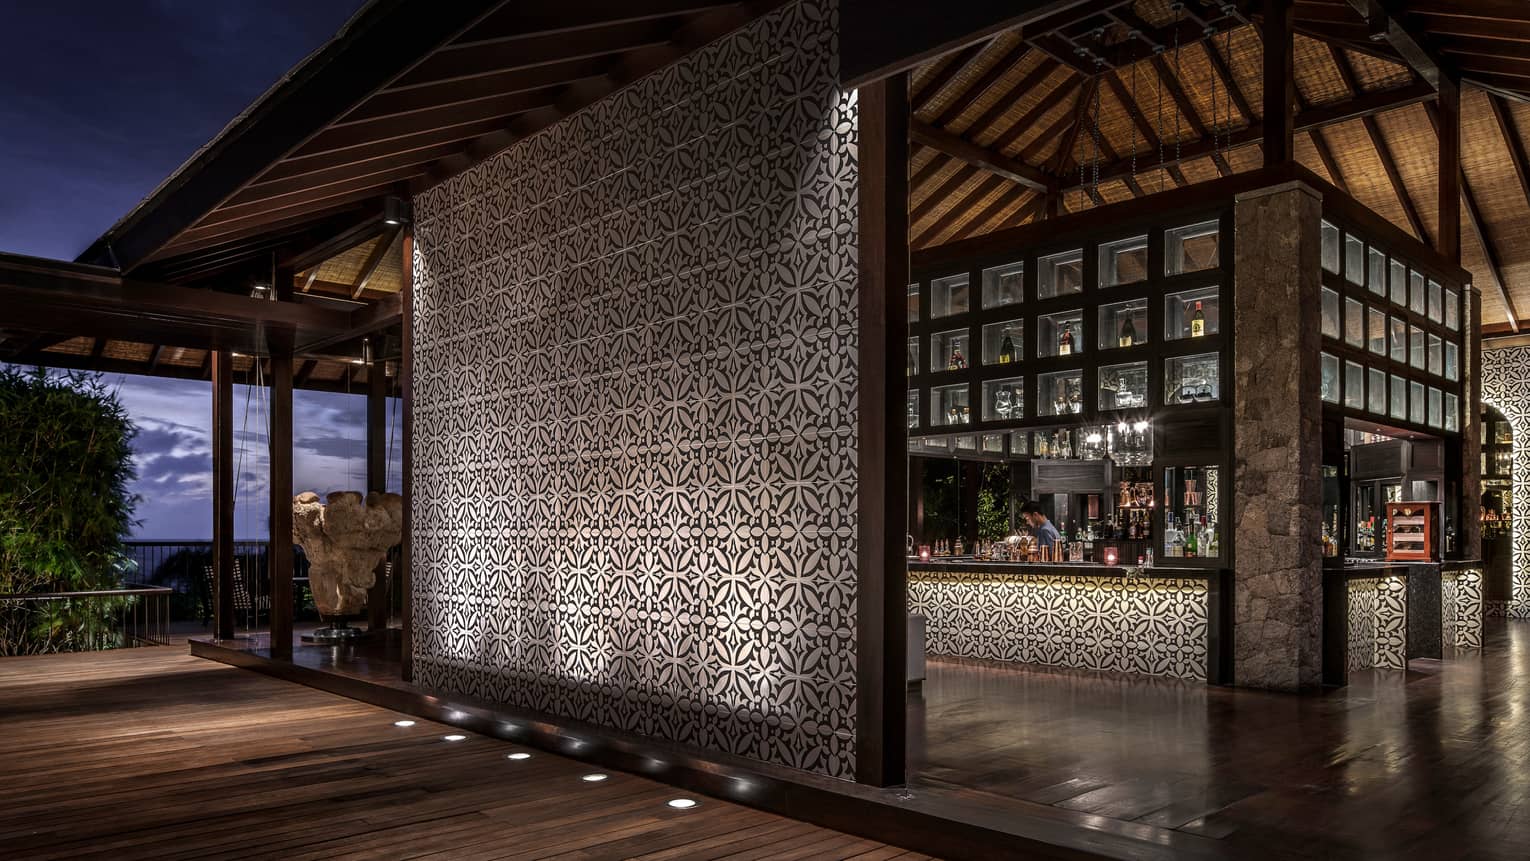 Bar interior, showing mosaic wall and mosaic lined bar with bartender and evening views out window